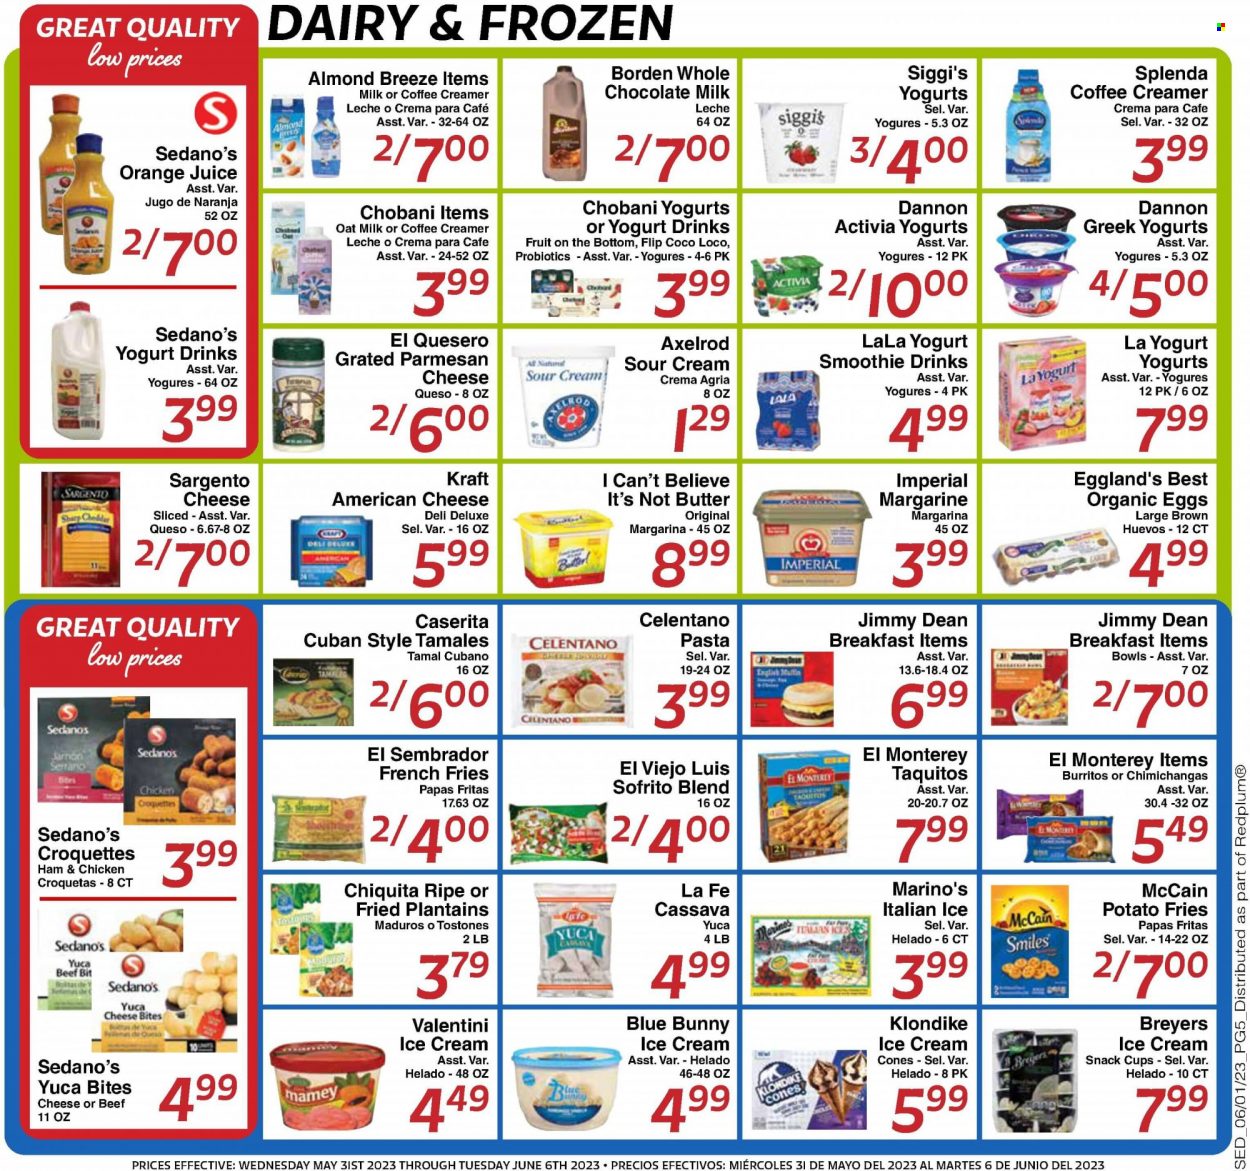 thumbnail - Sedano's Flyer - 05/31/2023 - 06/06/2023 - Sales products - english muffins, muffin, cassava, pasta, burrito, taquitos, Kraft®, Jimmy Dean, ham, snack, Jamón Serrano, dry-cured ham, american cheese, cheddar, parmesan, Sargento, Activia, Chobani, Dannon, yoghurt drink, Almond Breeze, oat milk, eggs, margarine, I Can't Believe It's Not Butter, sour cream, creamer, ice cream, Blue Bunny, McCain, potato fries, french fries, milk chocolate, waffle cones, orange juice, juice, smoothie, probiotics, plantains. Page 5.